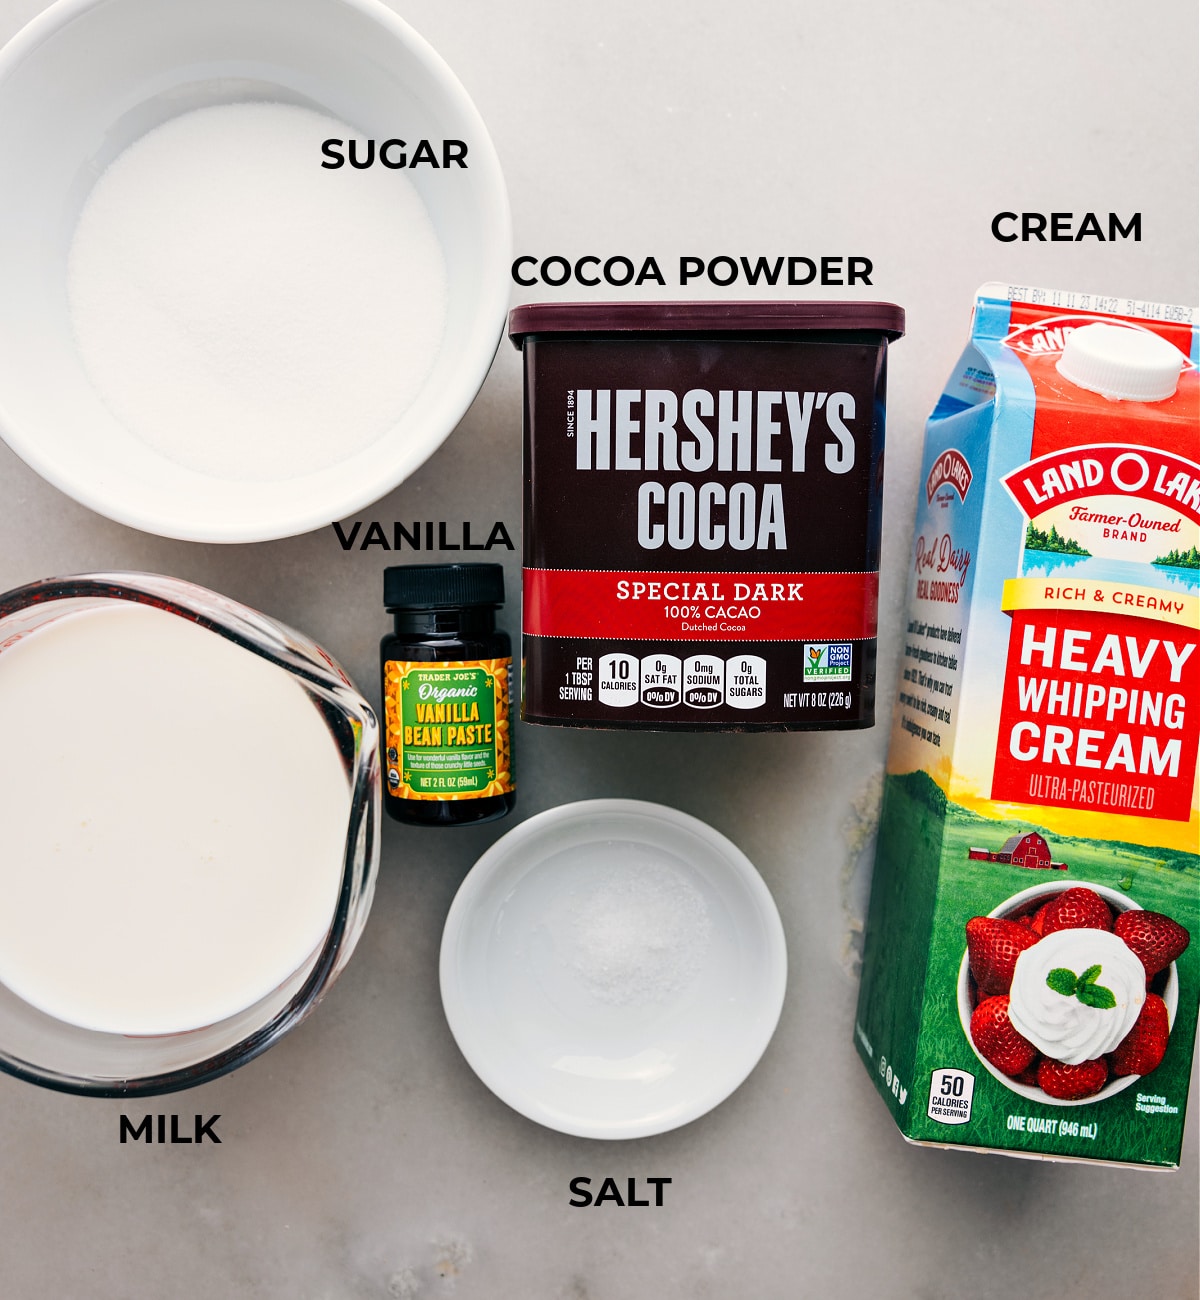 Ingredients for hot chocolate recipe: milk, sugar, cocoa powder, and more, ready for preparation.